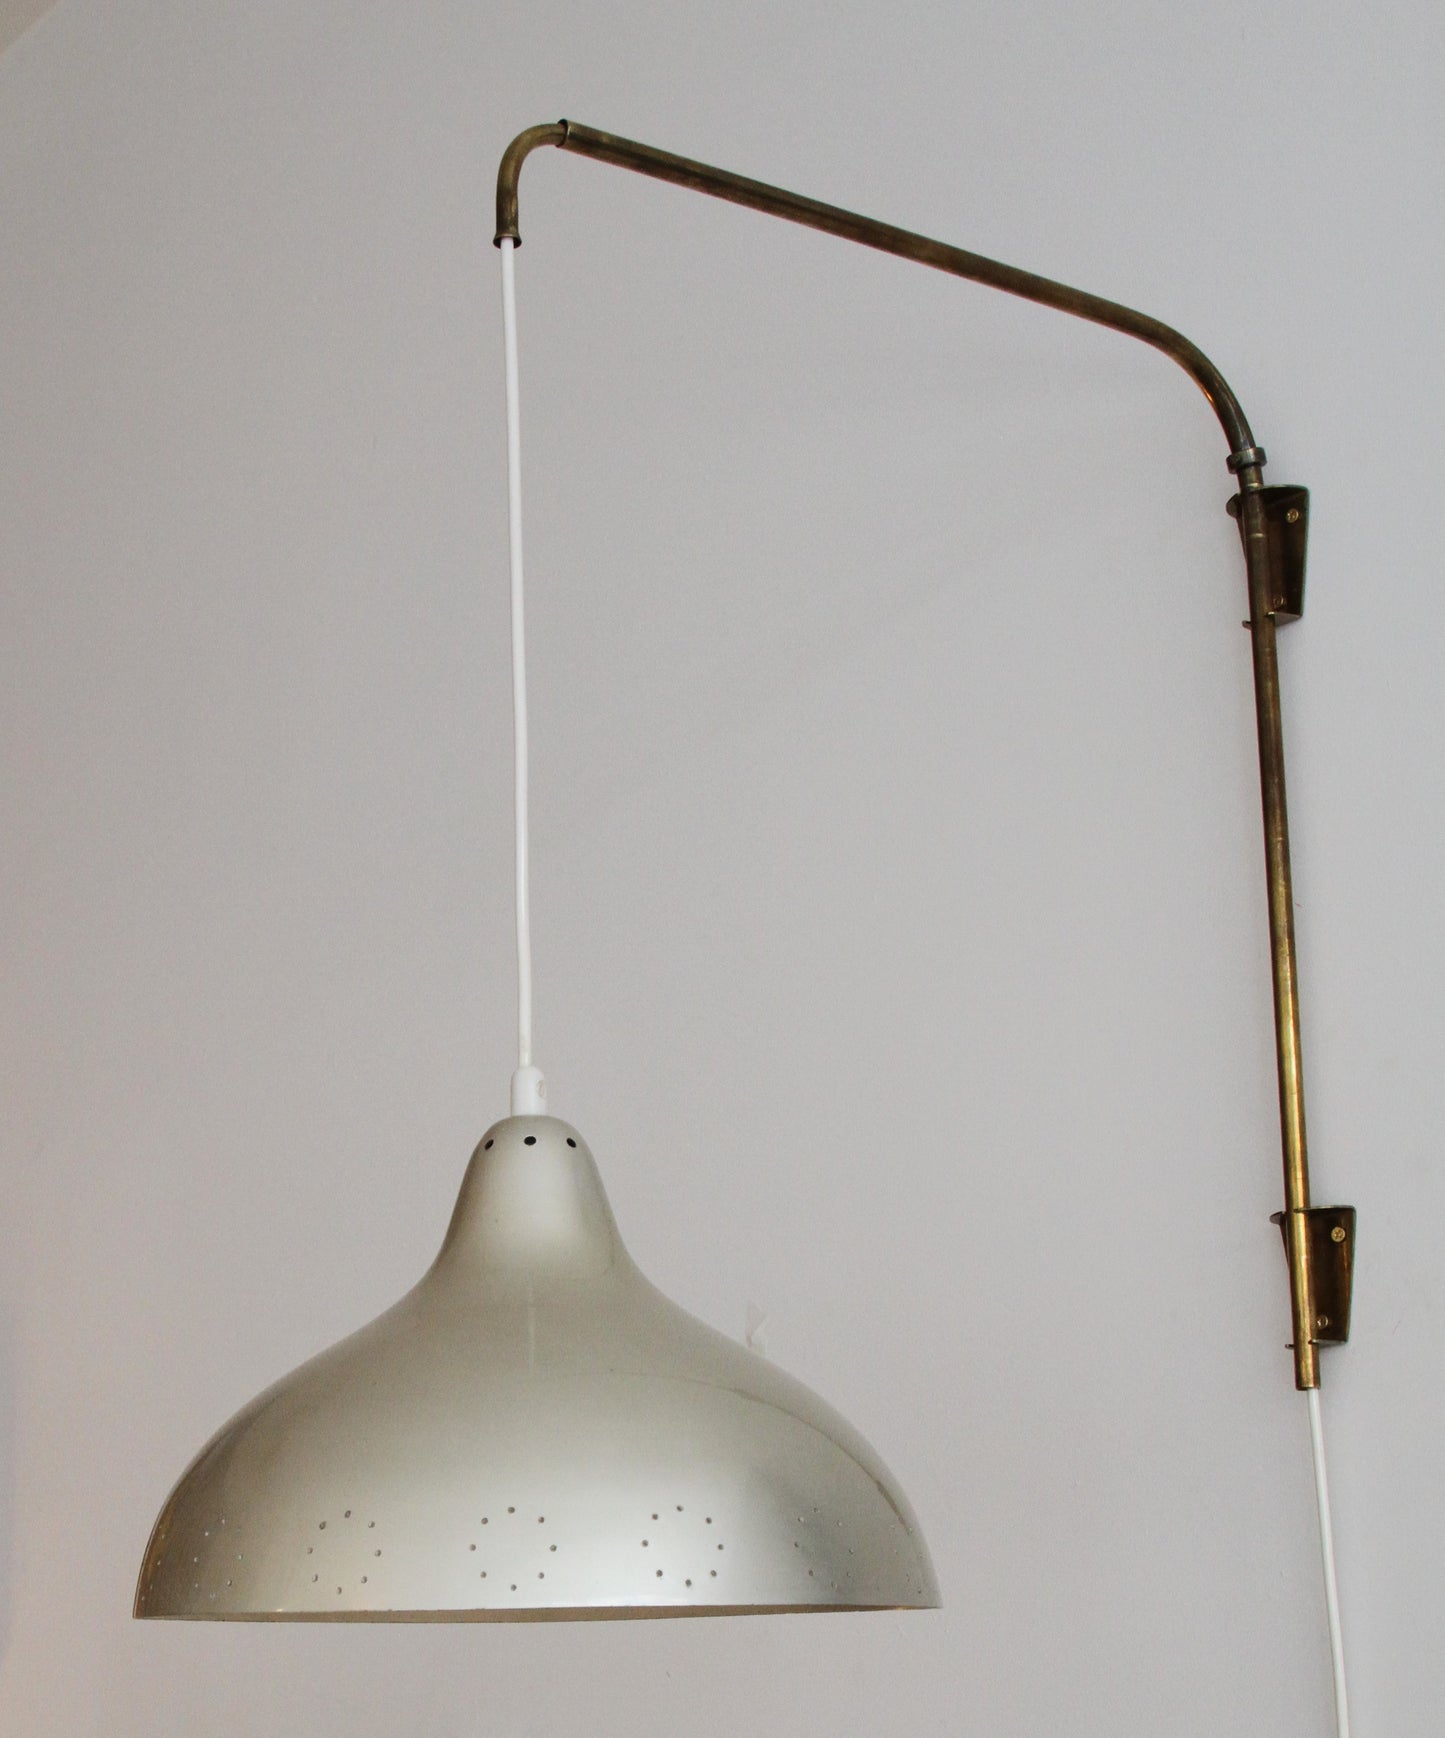 Itsu Brass Wall Pendant with Perforated Aluminum Shade